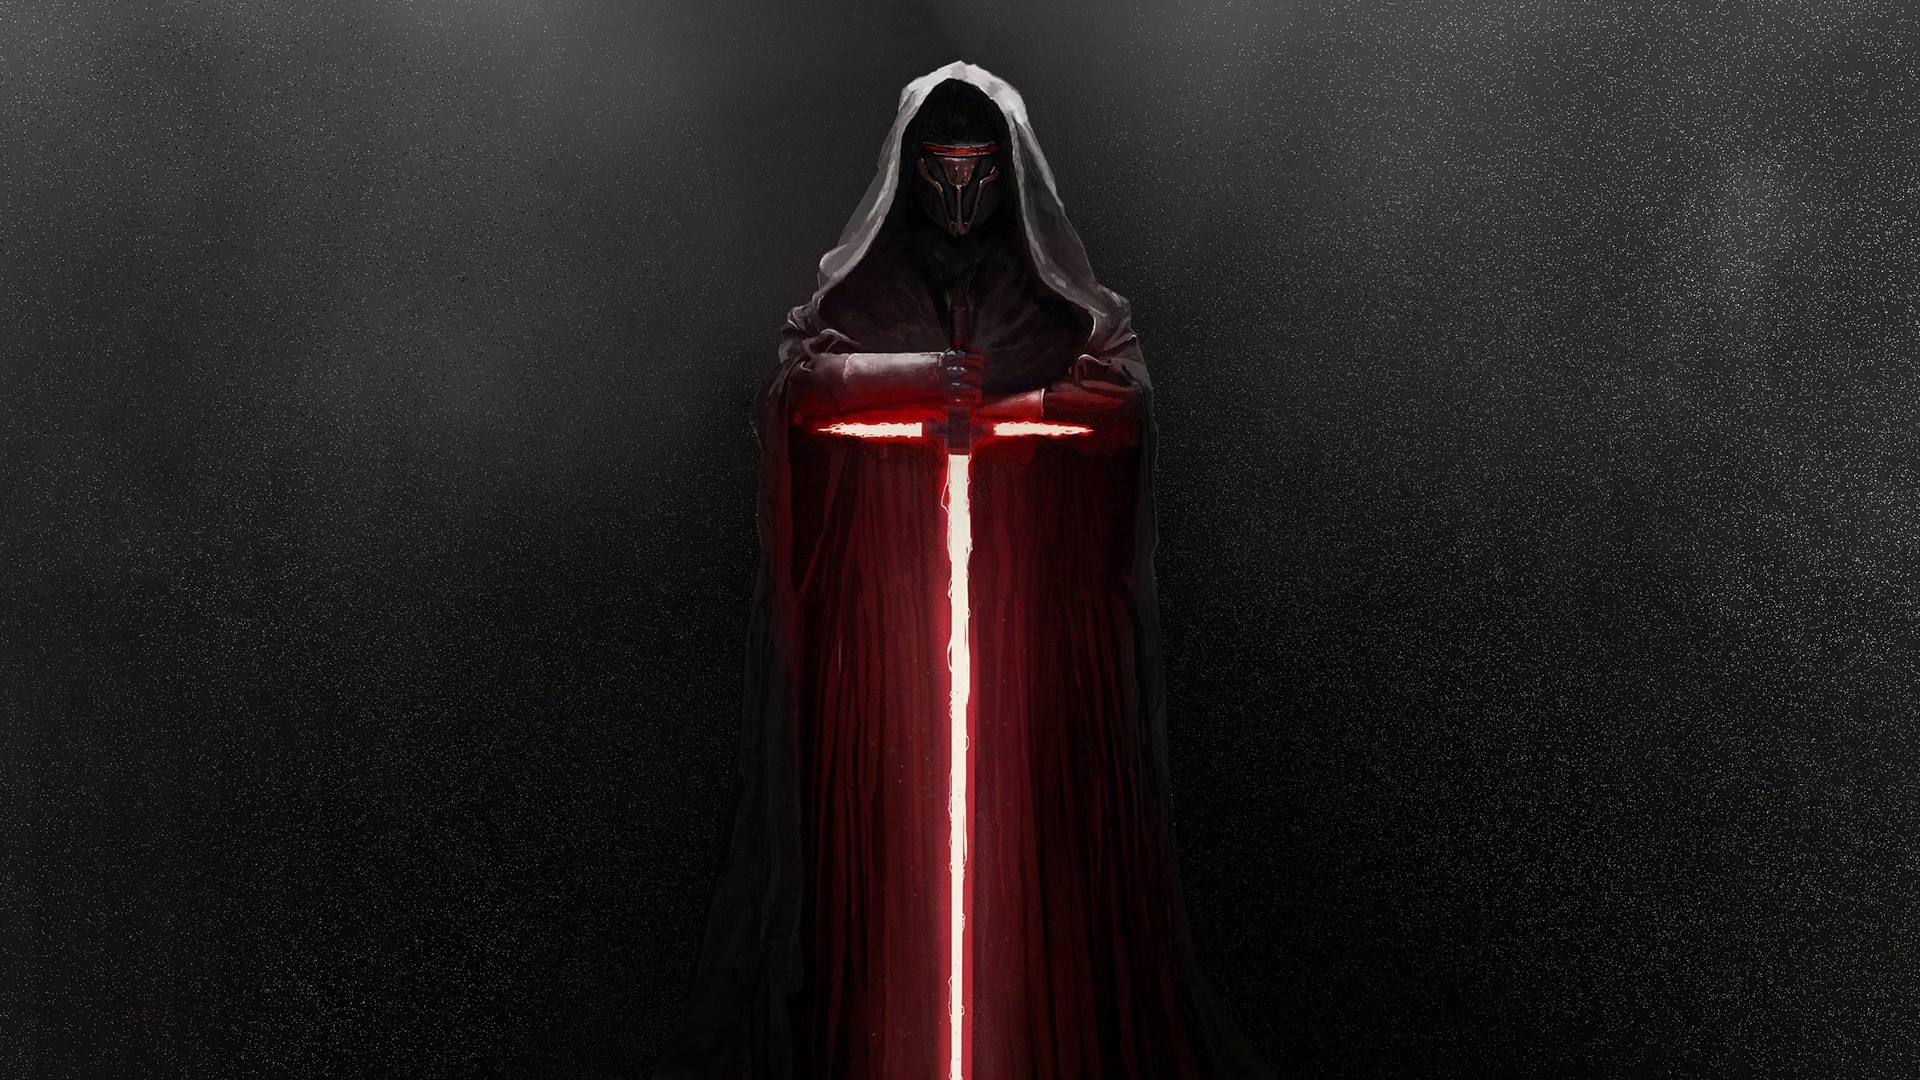 Kylo Ren in the darkness with a glowing sword.